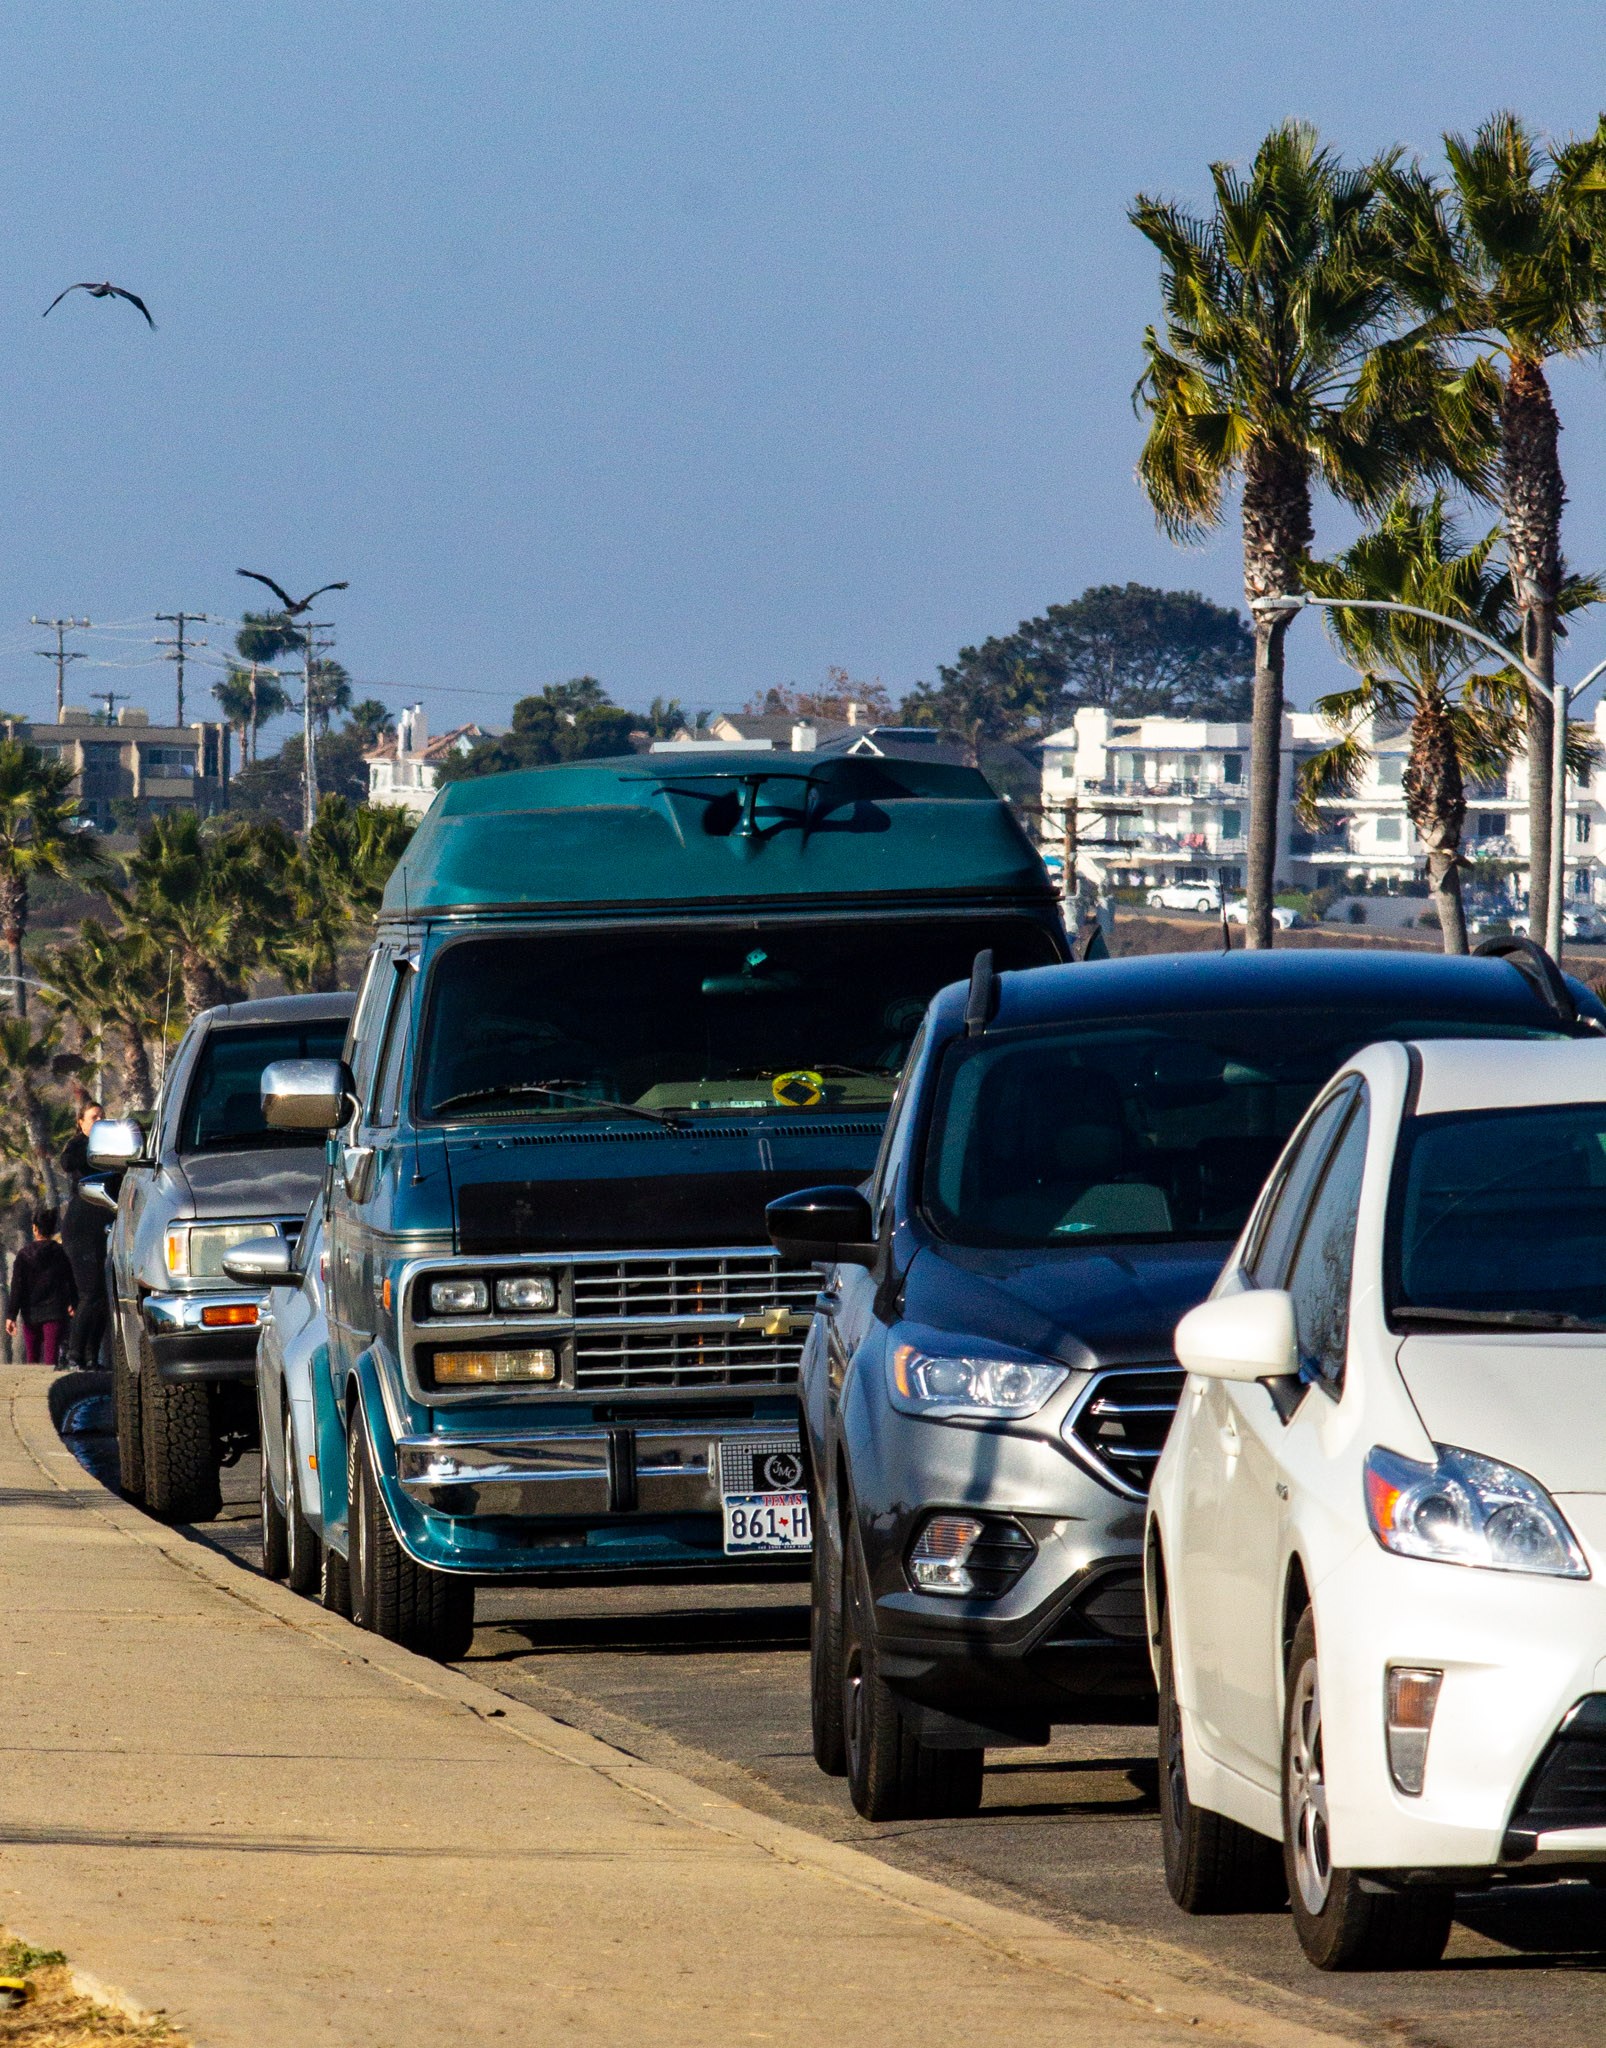 Cars parallel parked at beach